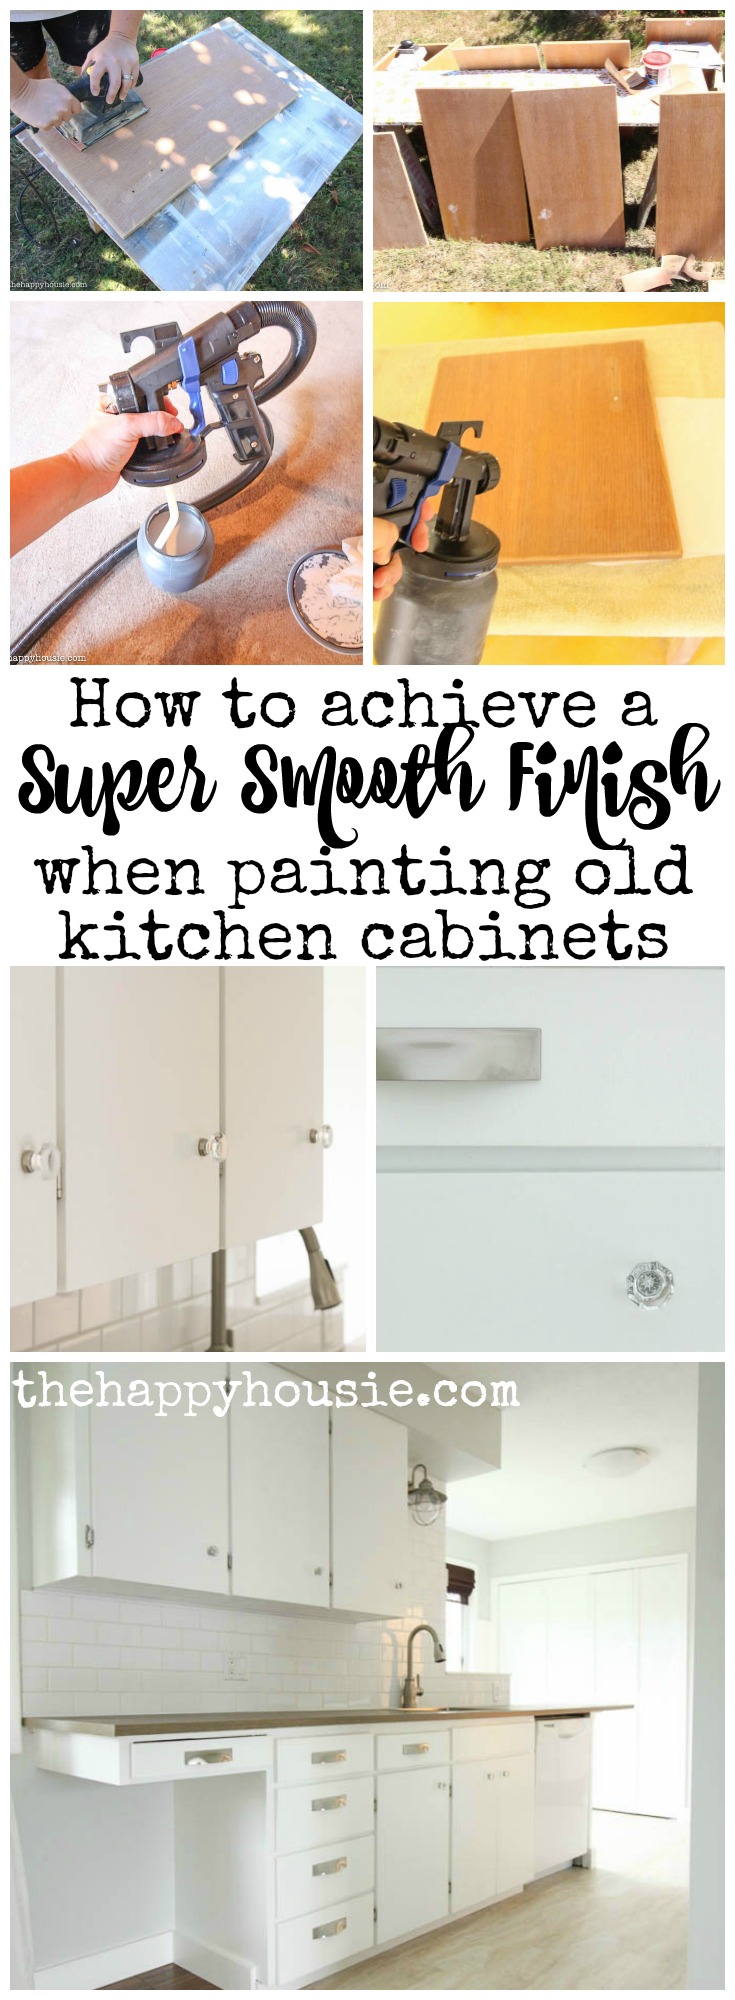 How to achieve a super smooth finish when painting old kitchen cabinets with the HomeRight Finish Max Pro tutorial poster.